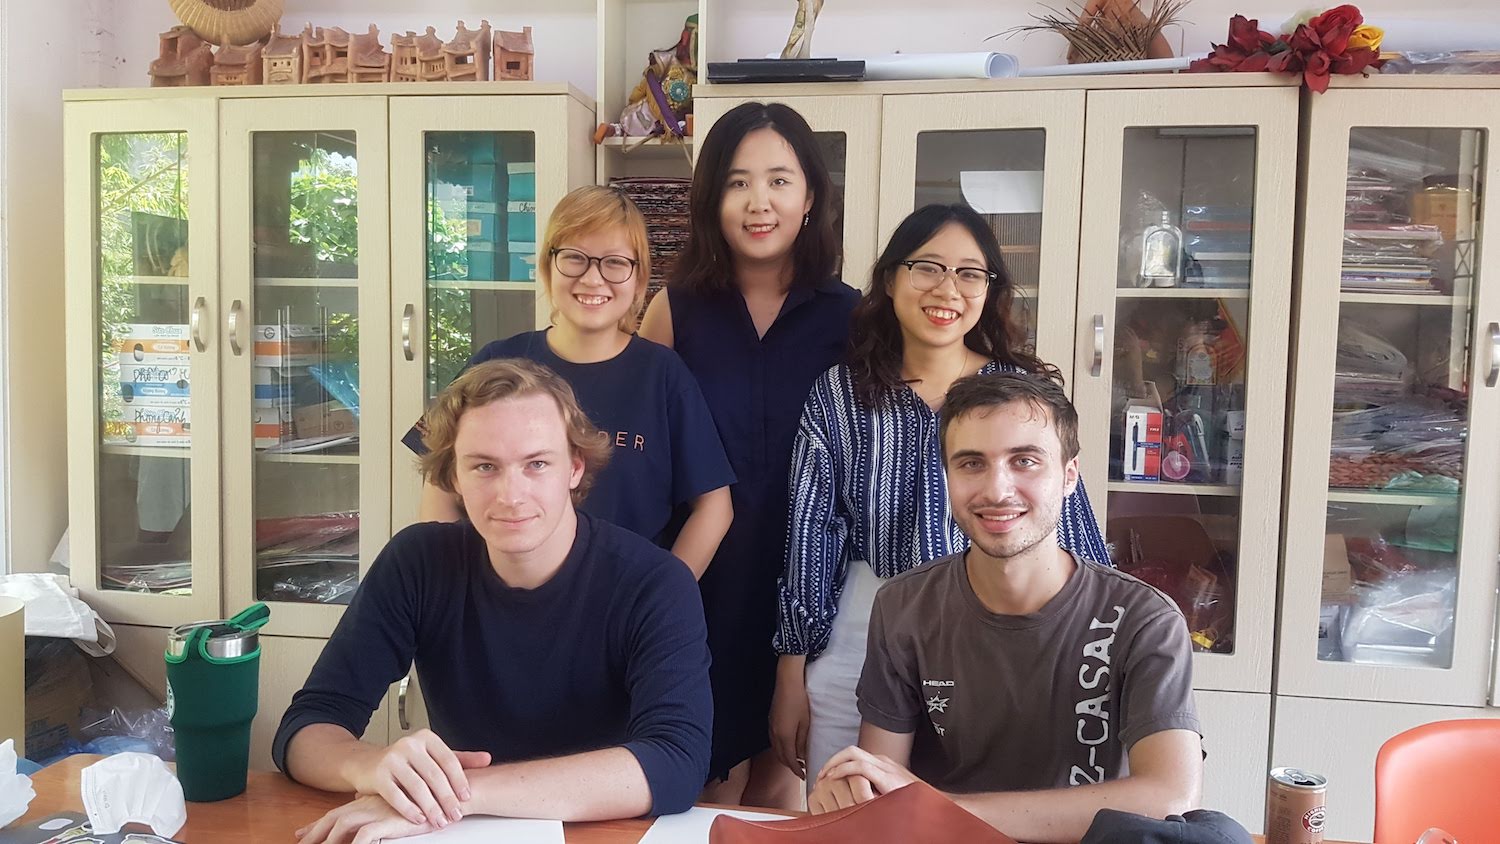 The GESI internship team at Vụn Art, comprised of three Northwestern students and two local college students